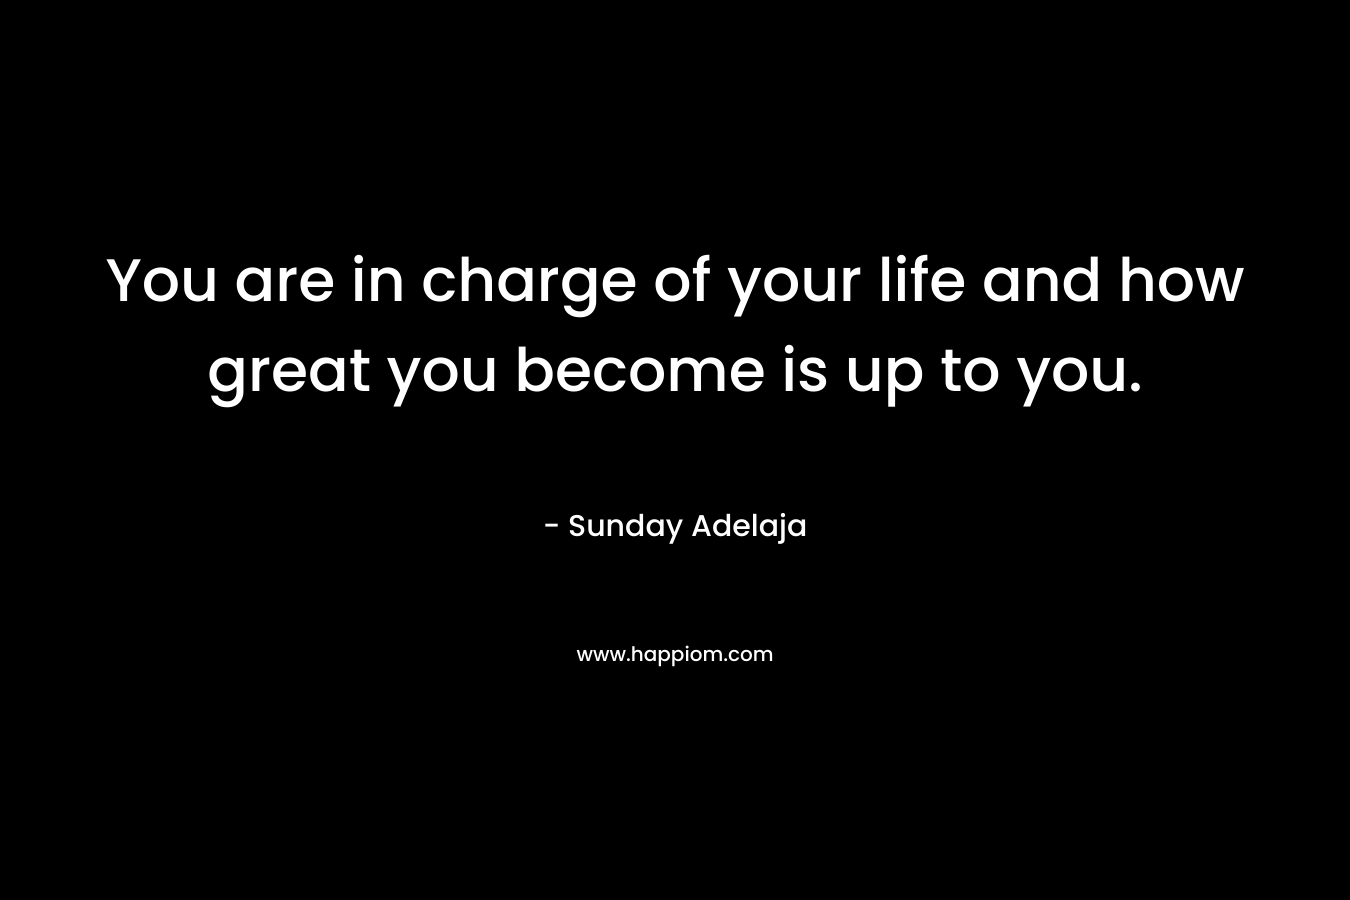 You are in charge of your life and how great you become is up to you.